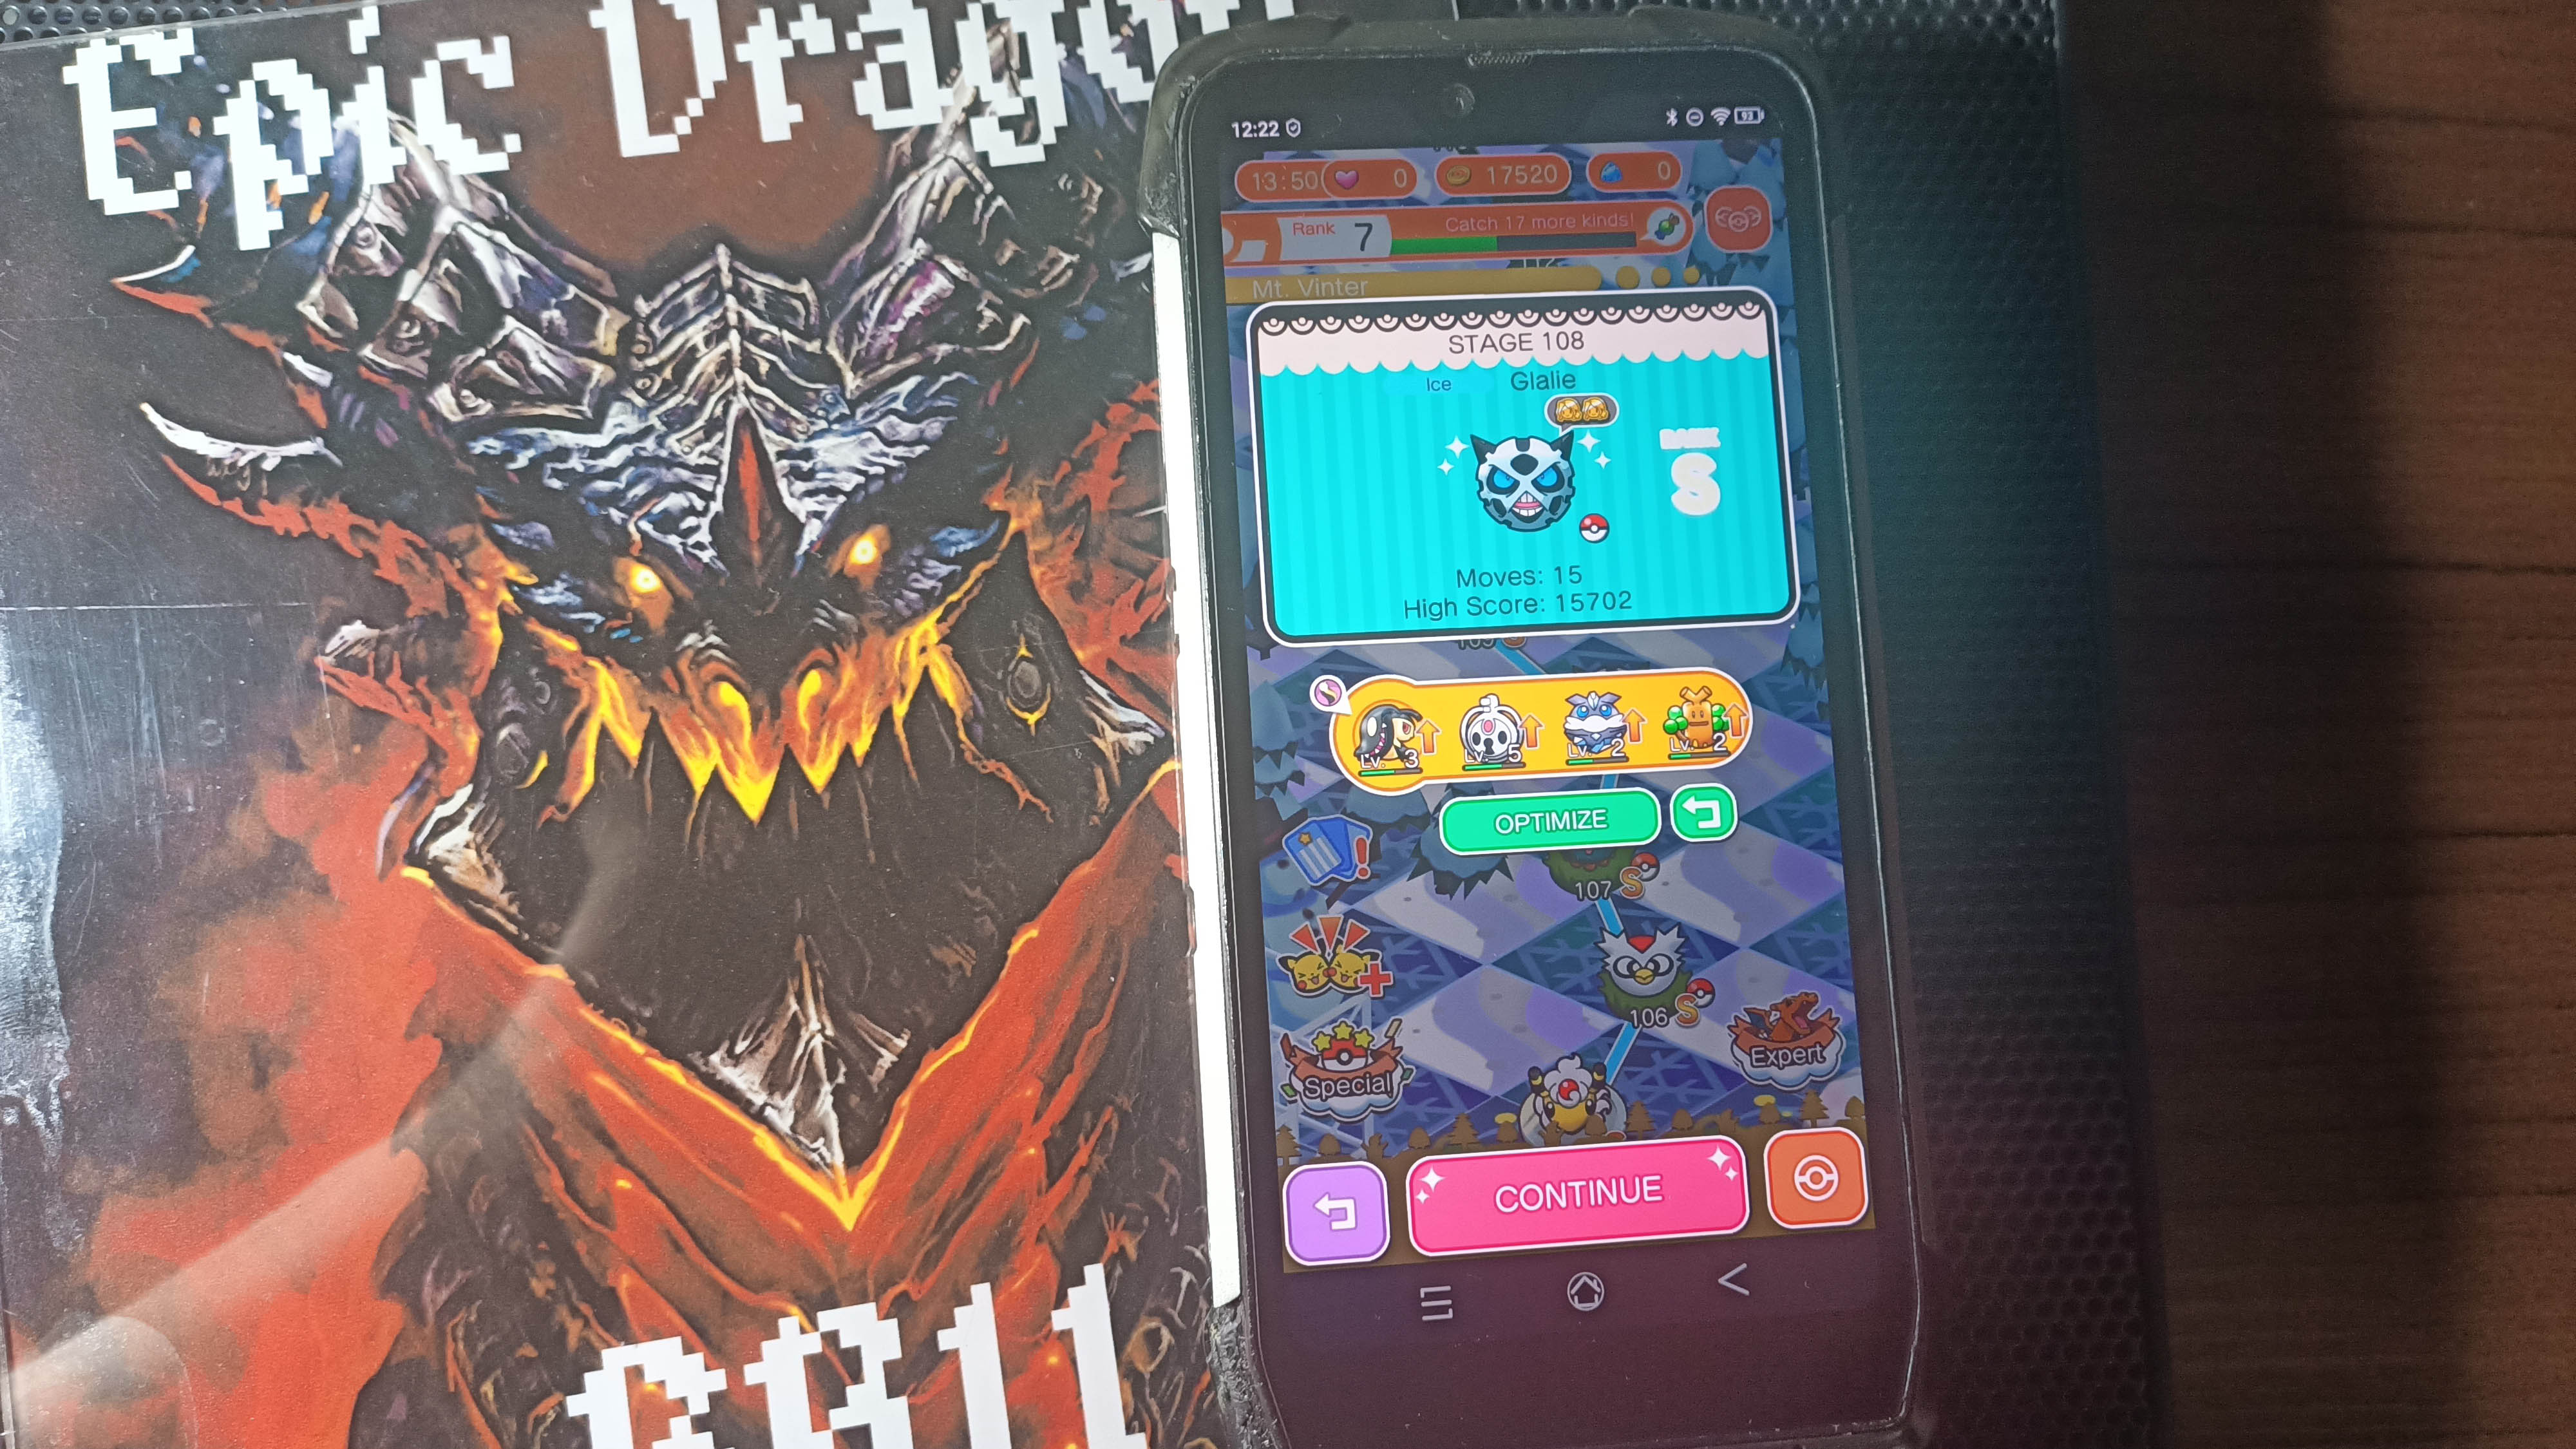 EpicDragon: Pokemon Shuffle Mobile: Stage 108 (Android) 15,702 points on 2022-09-27 17:33:34